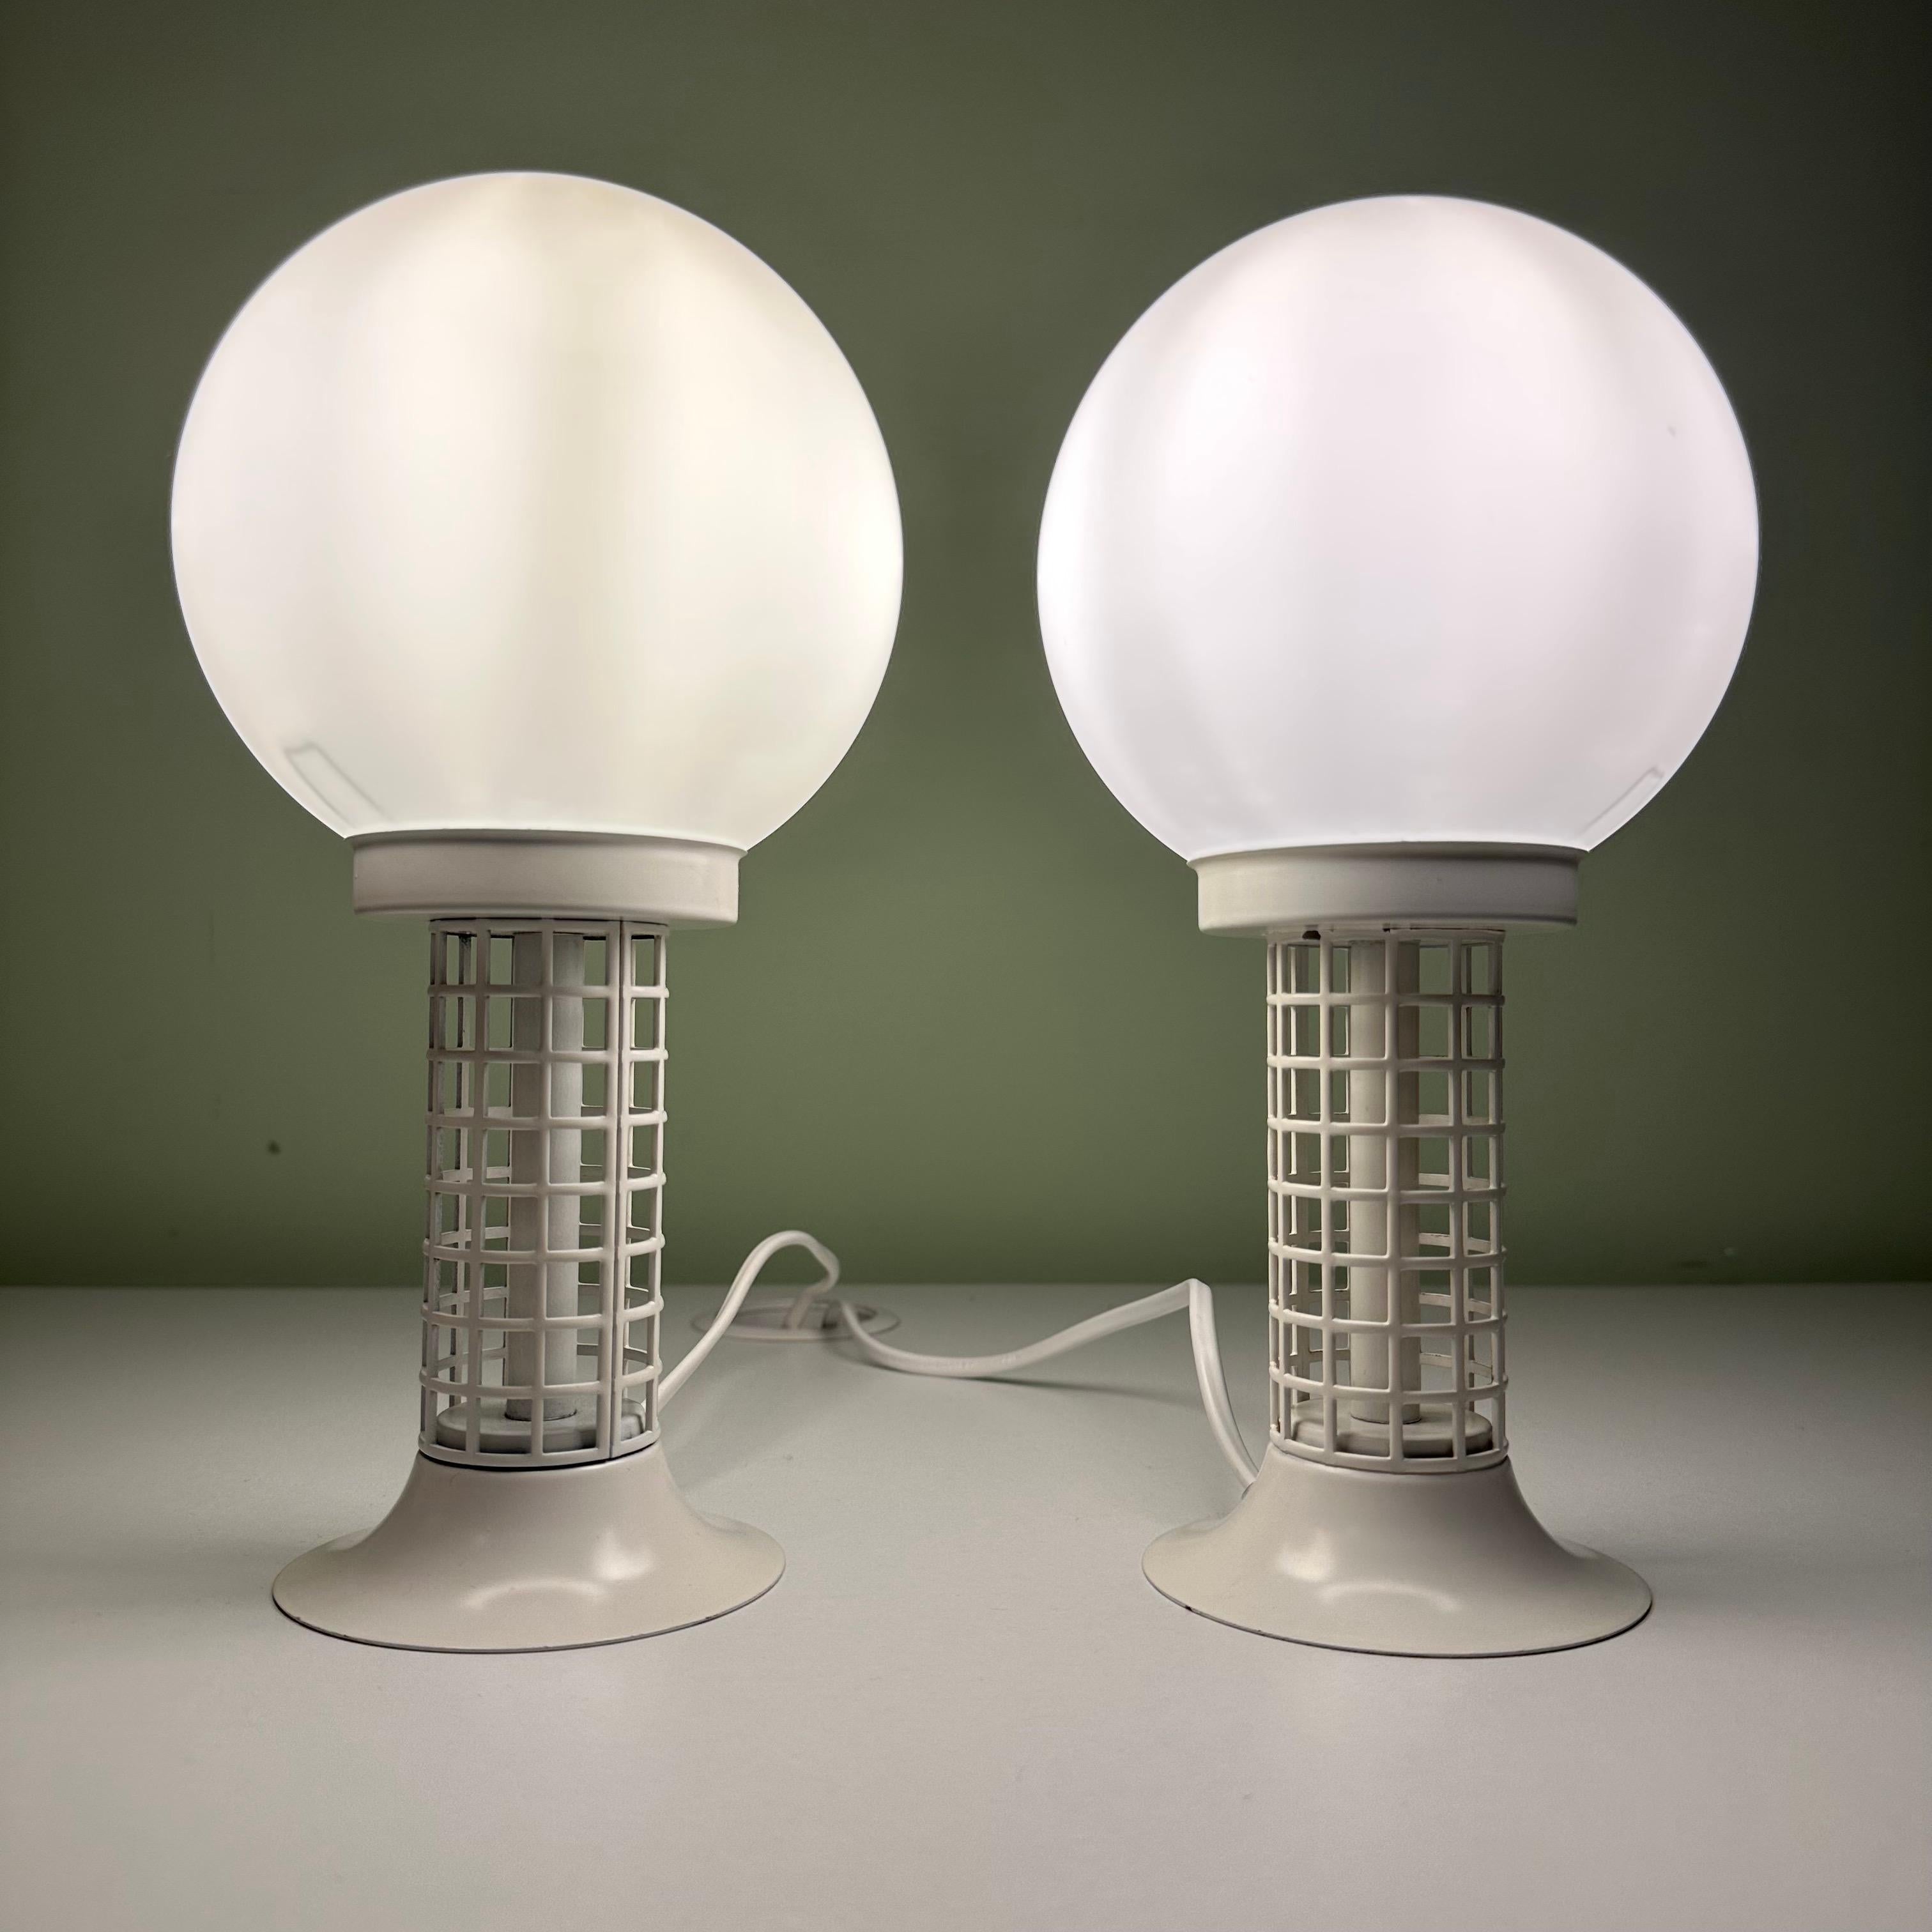 Pair of Vintage White Modernist Globe Table Lamps In Good Condition For Sale In Amityville, NY